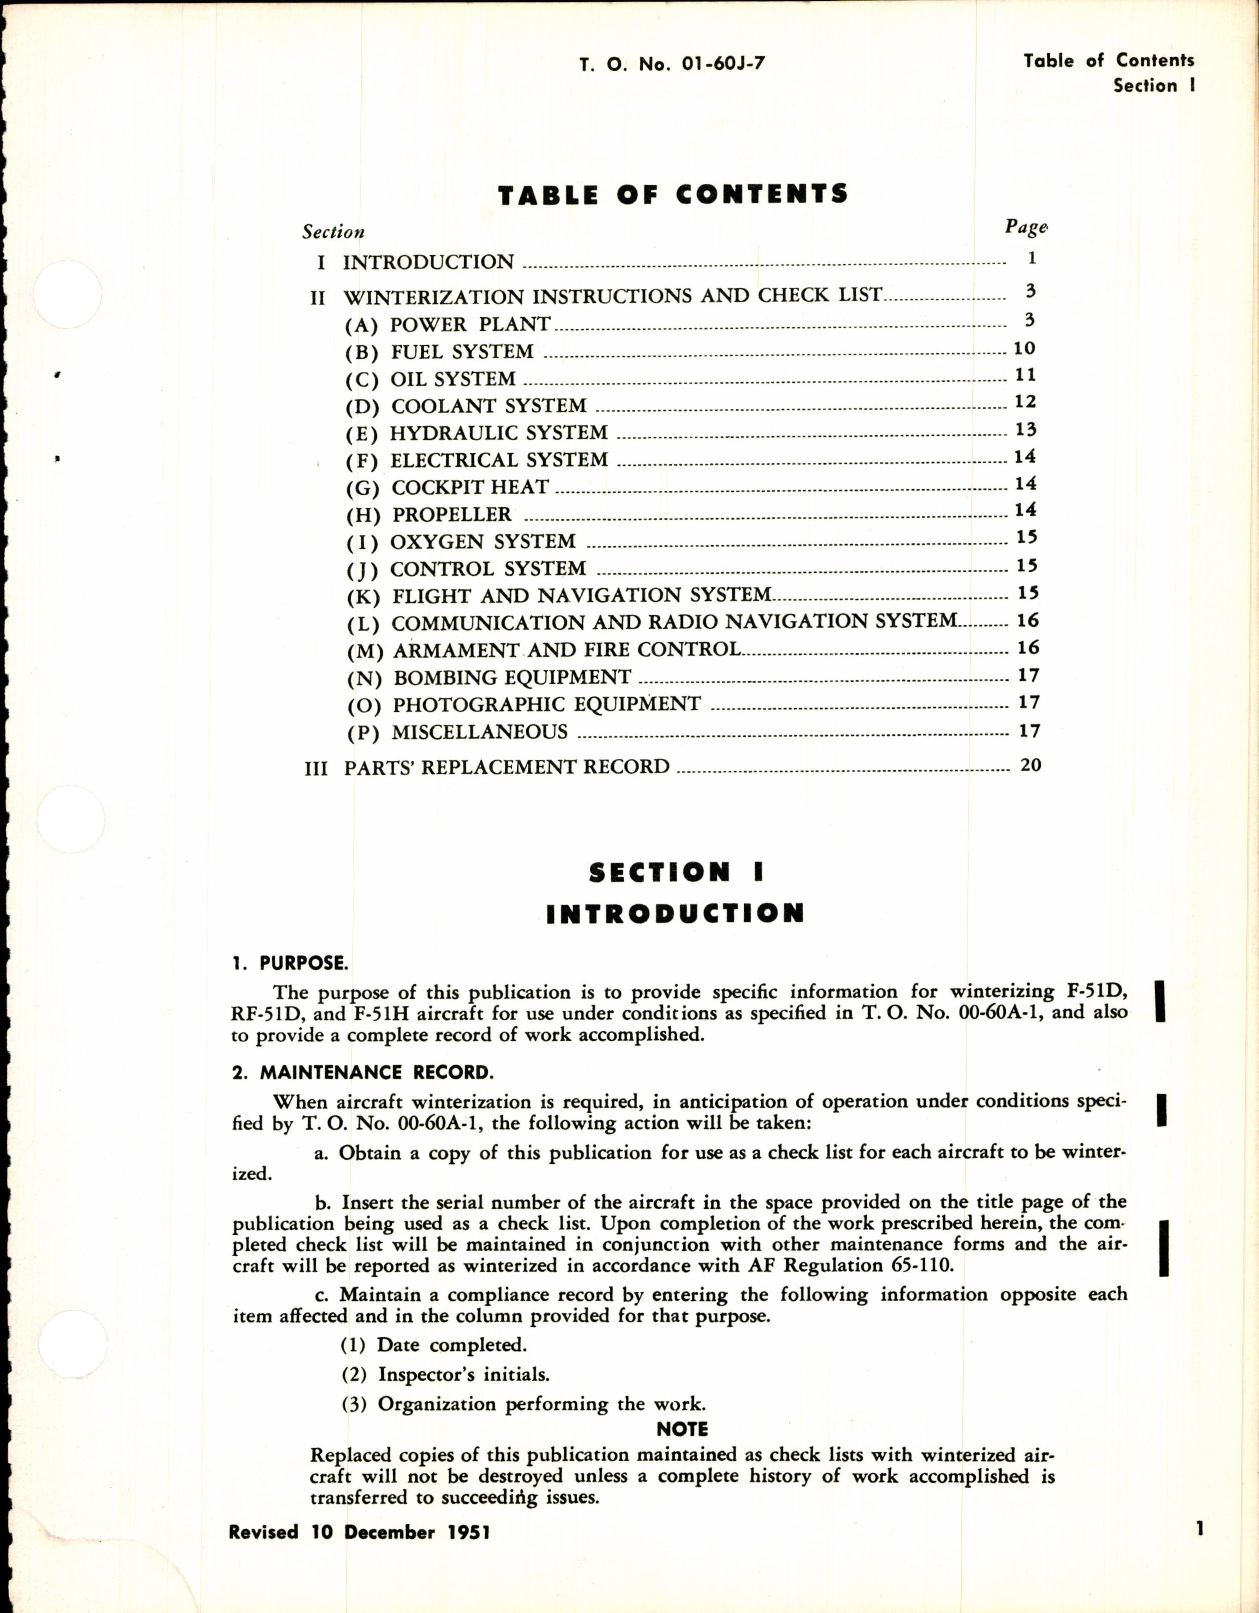 Sample page 3 from AirCorps Library document: Winterization Instructions and Check List for F-51